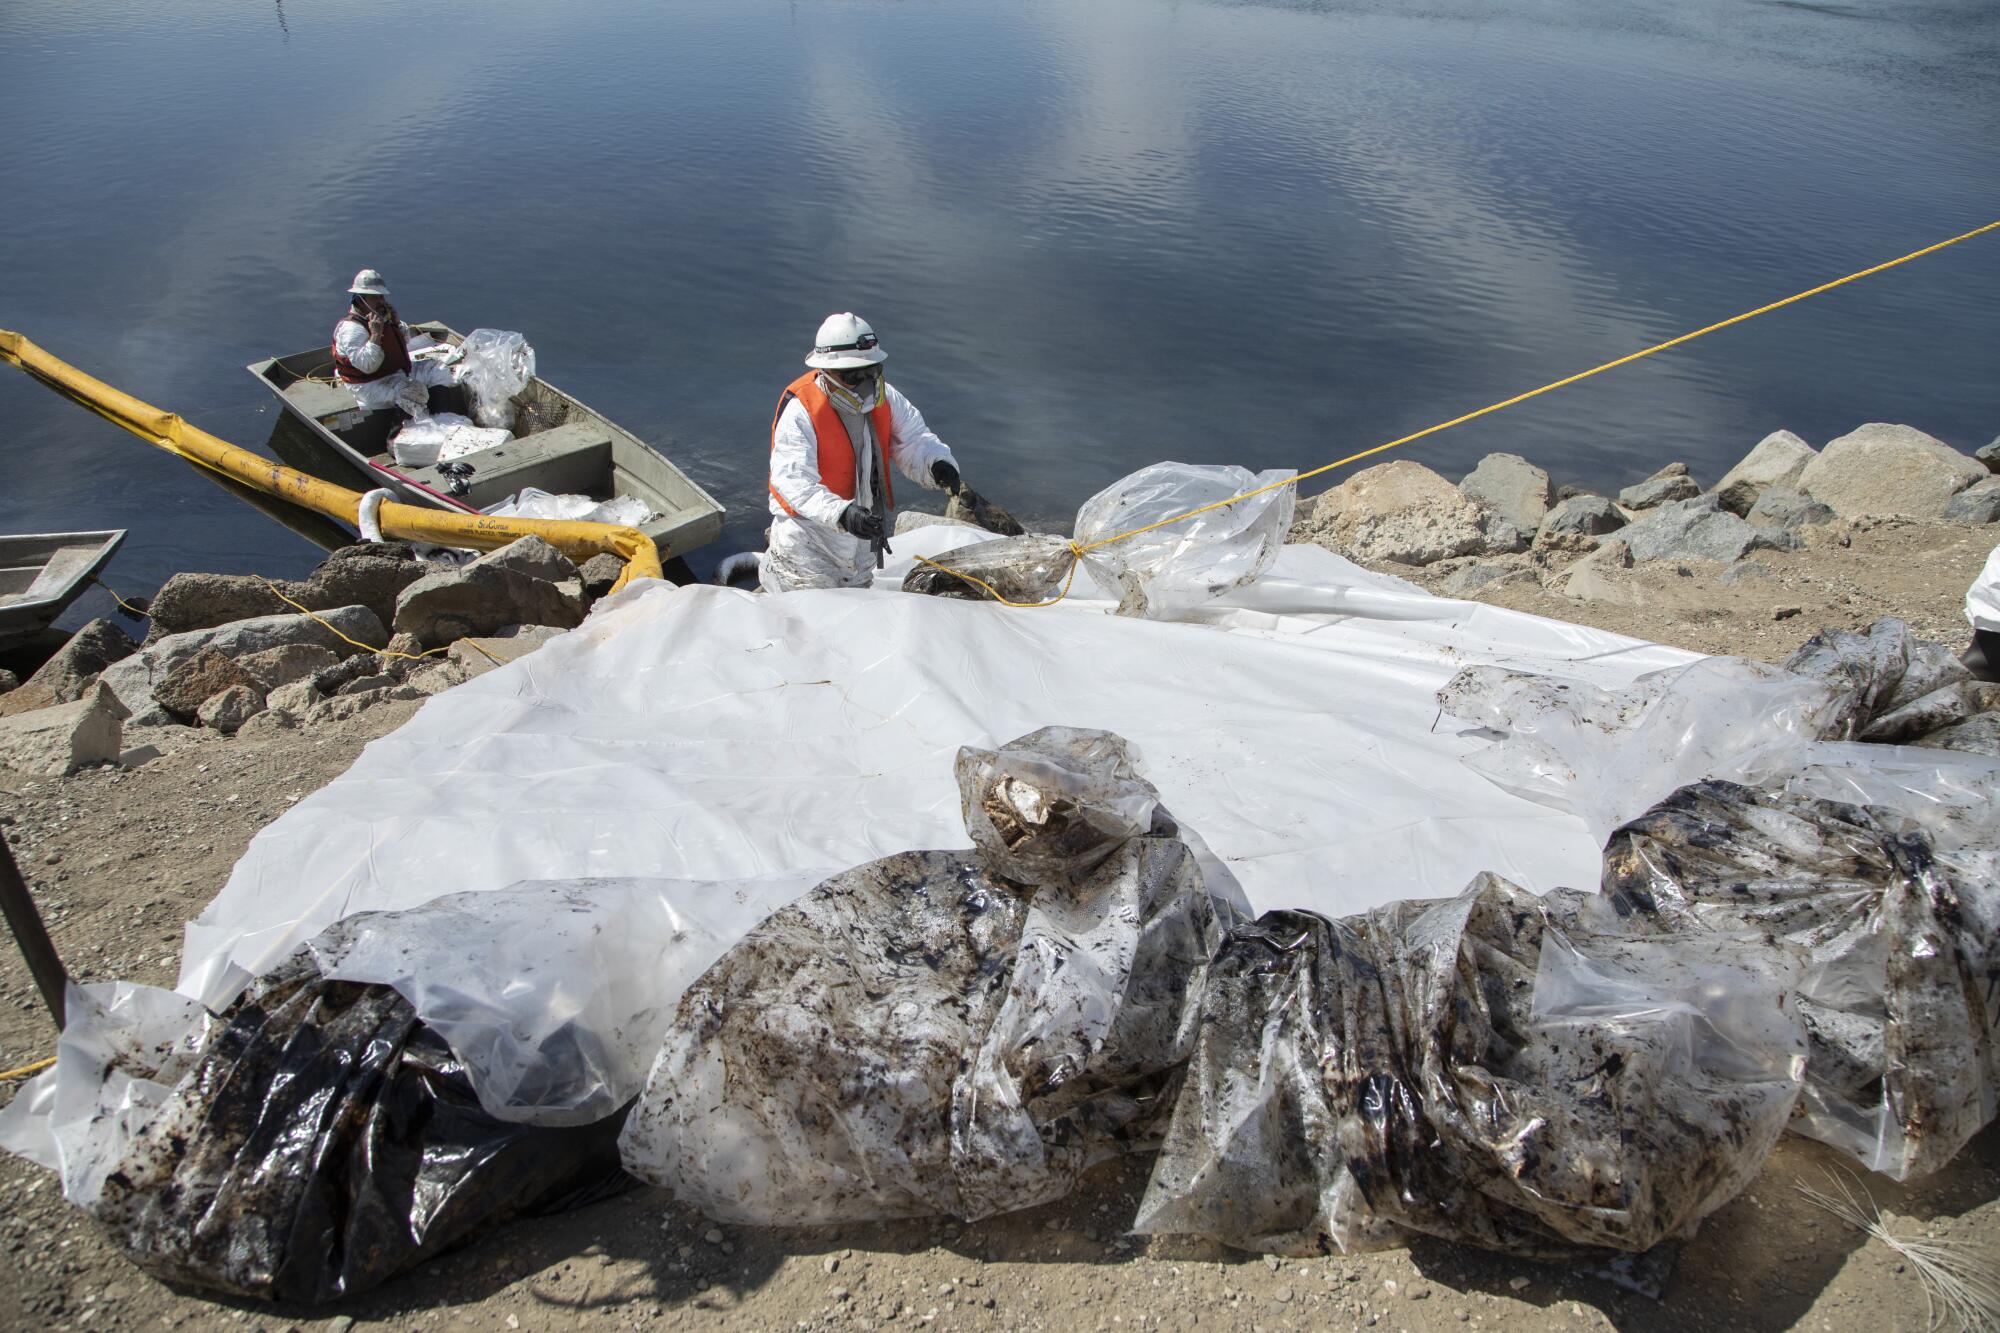 Workers with Patriot Environmental Services collect bags of oil-soaked pads and other debris during cleanup at Talbert Marsh.